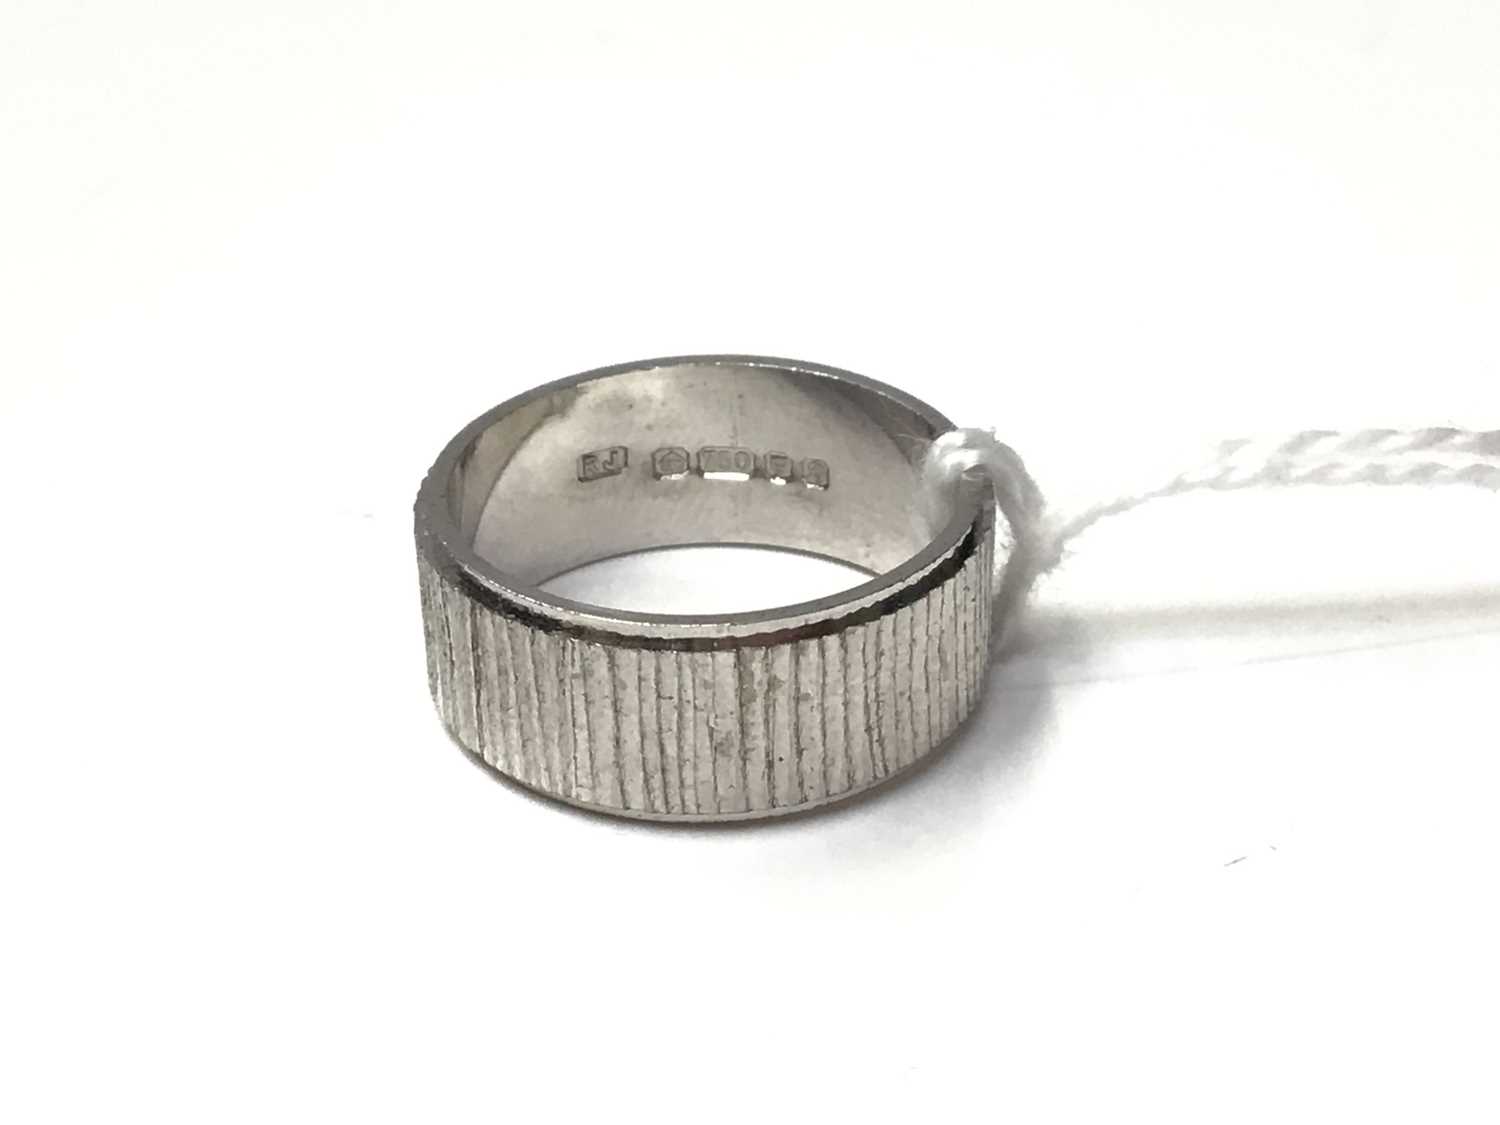 Lot 186 - 1970s 18ct white gold wedding ring with textured line decoartion to the band